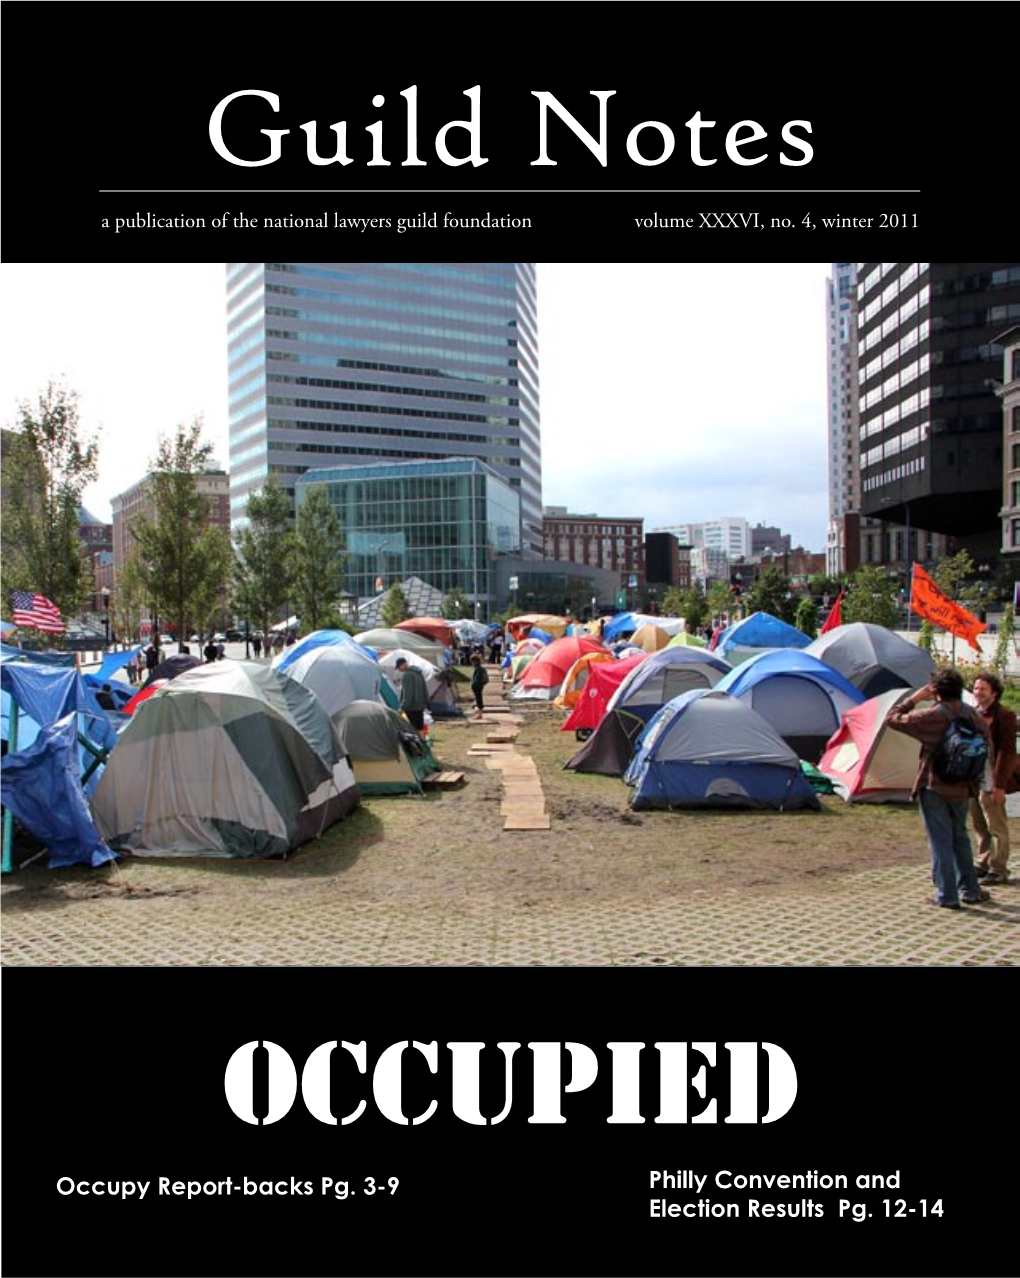 Occupy Report-Backs Pg. 3-9 Philly Convention and Election Results Pg